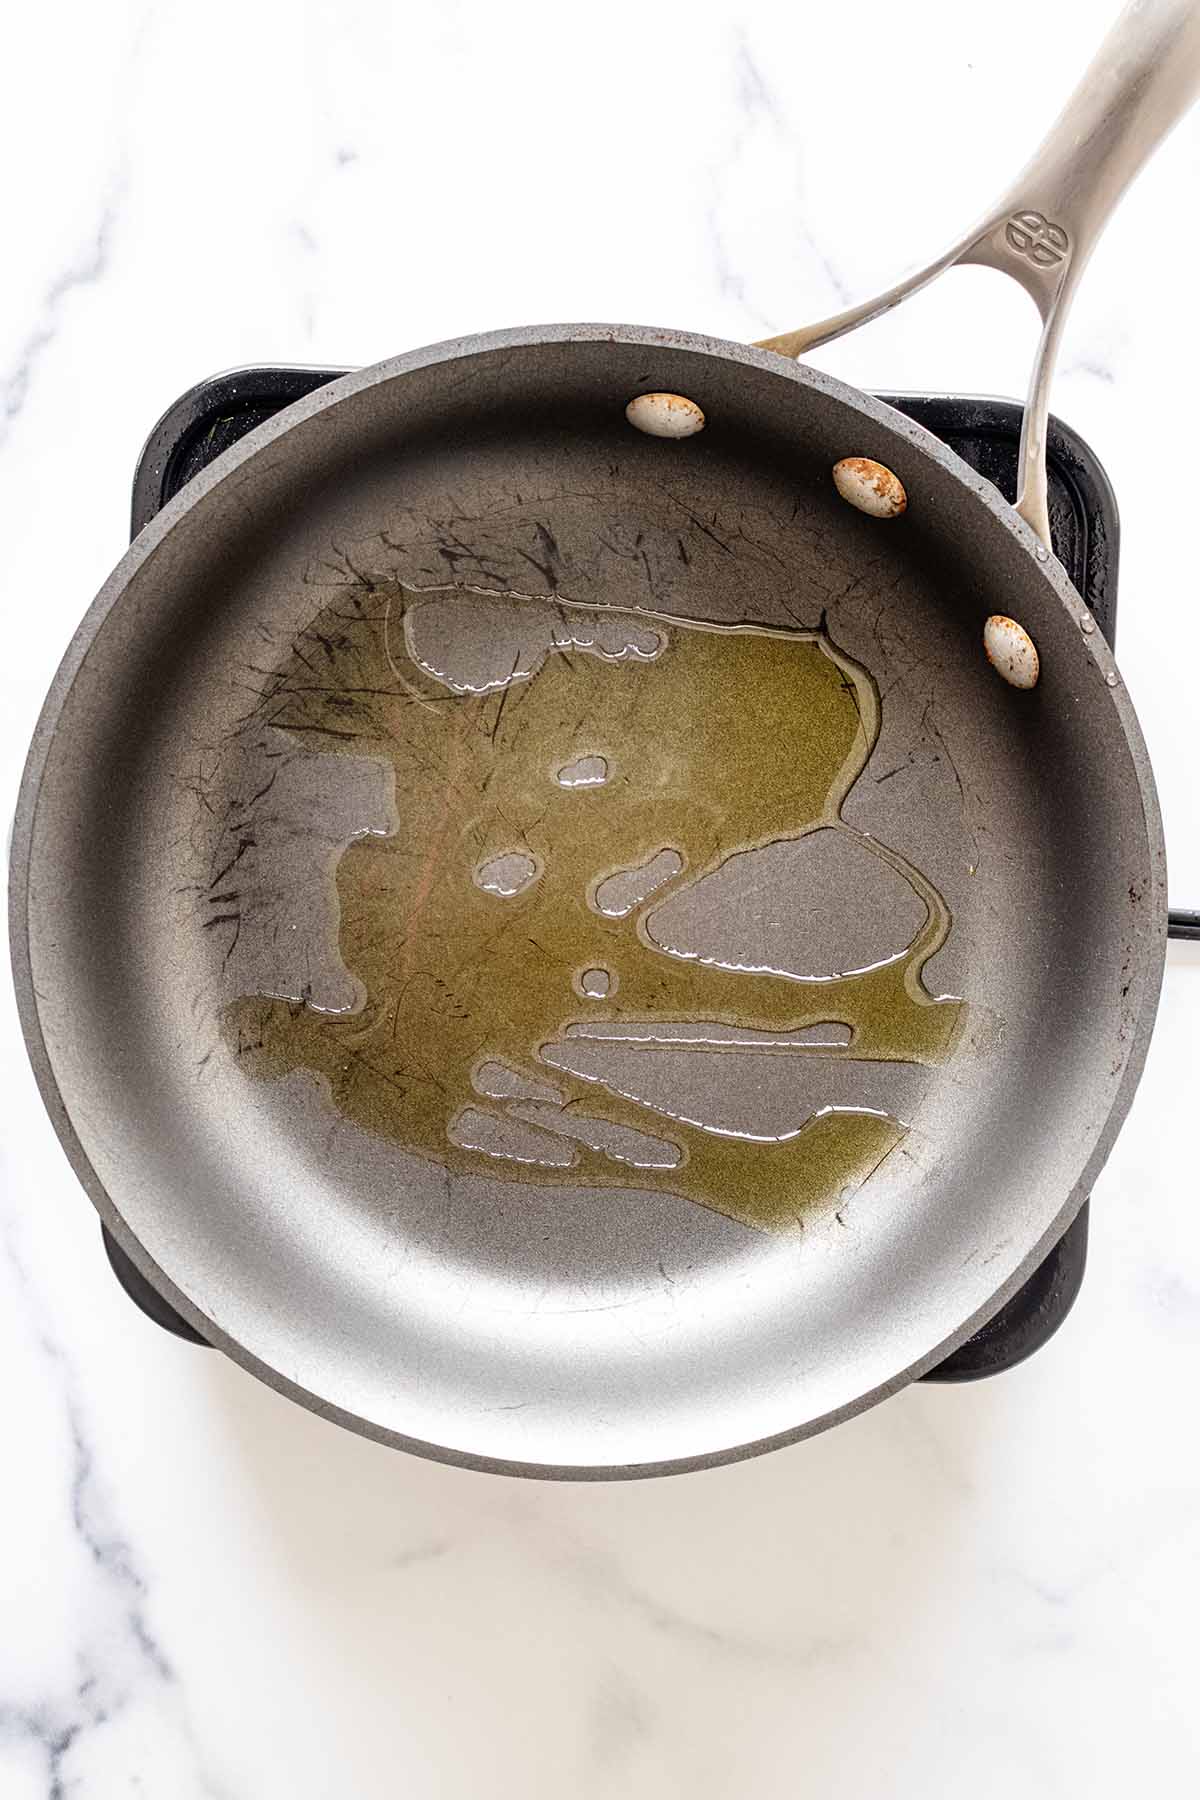 Overhead view of olive oil in a skillet